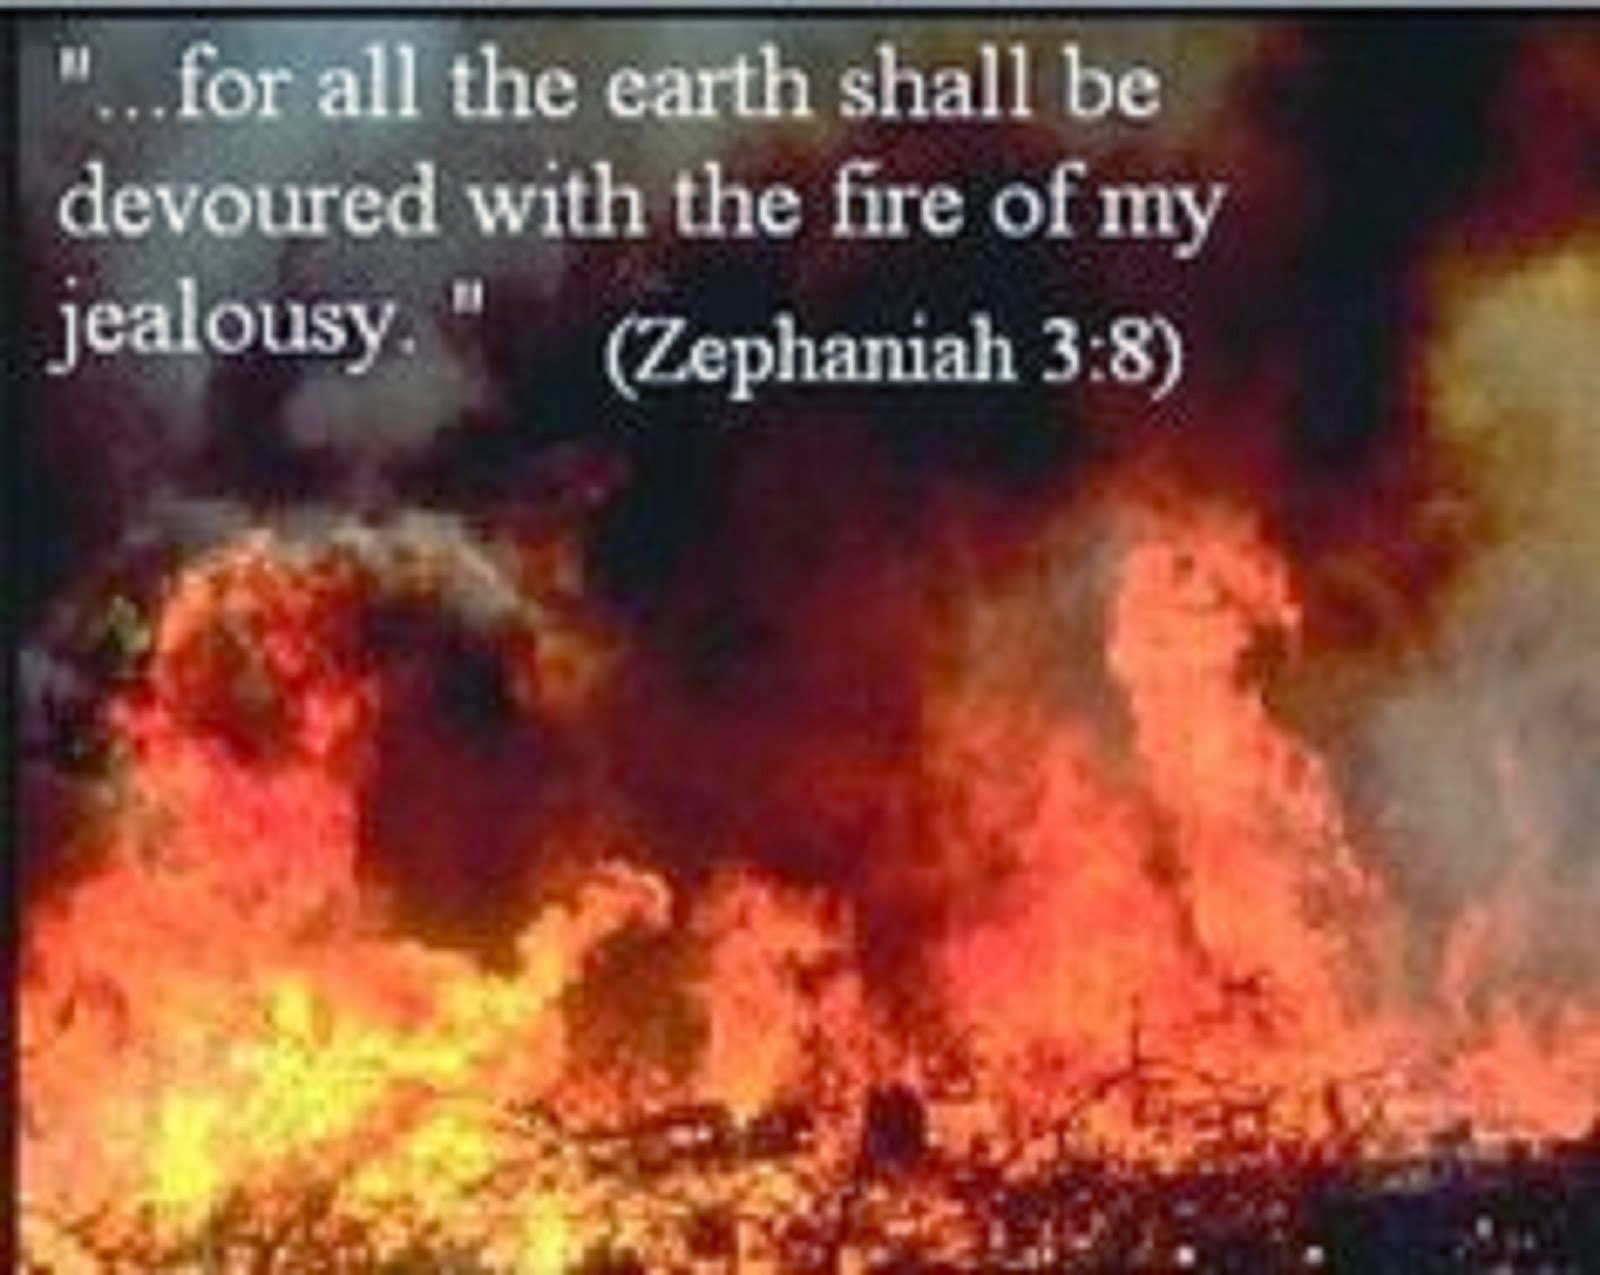 GOD WILL DESTROY THE EARTH THE SECOND TIME, ONLY THIS TIME IT WILL B E BY FIRE